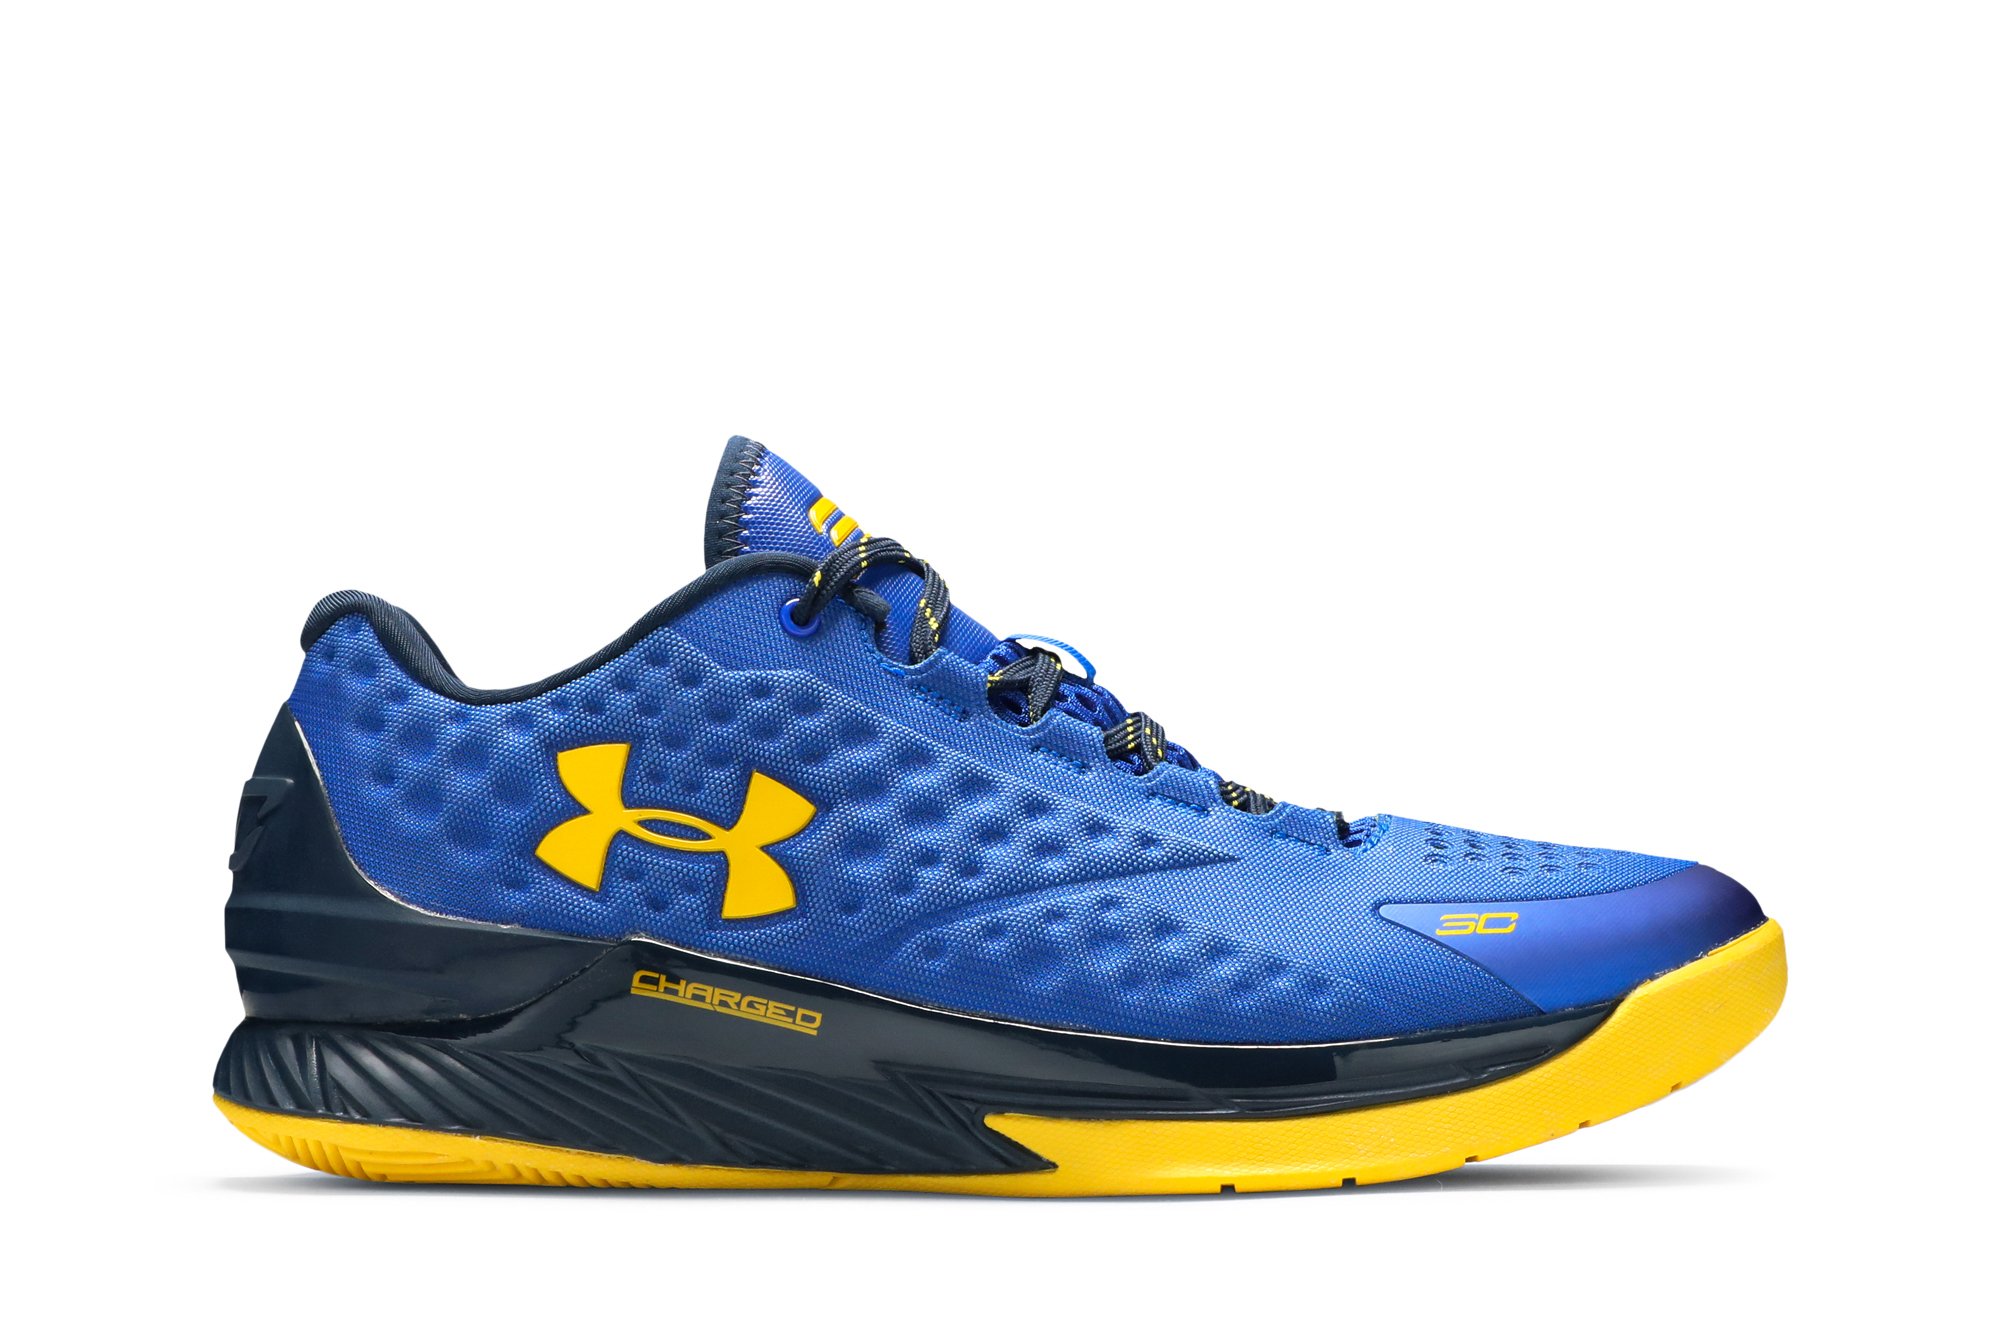 Curry 1 Low 'Warriors' | GOAT